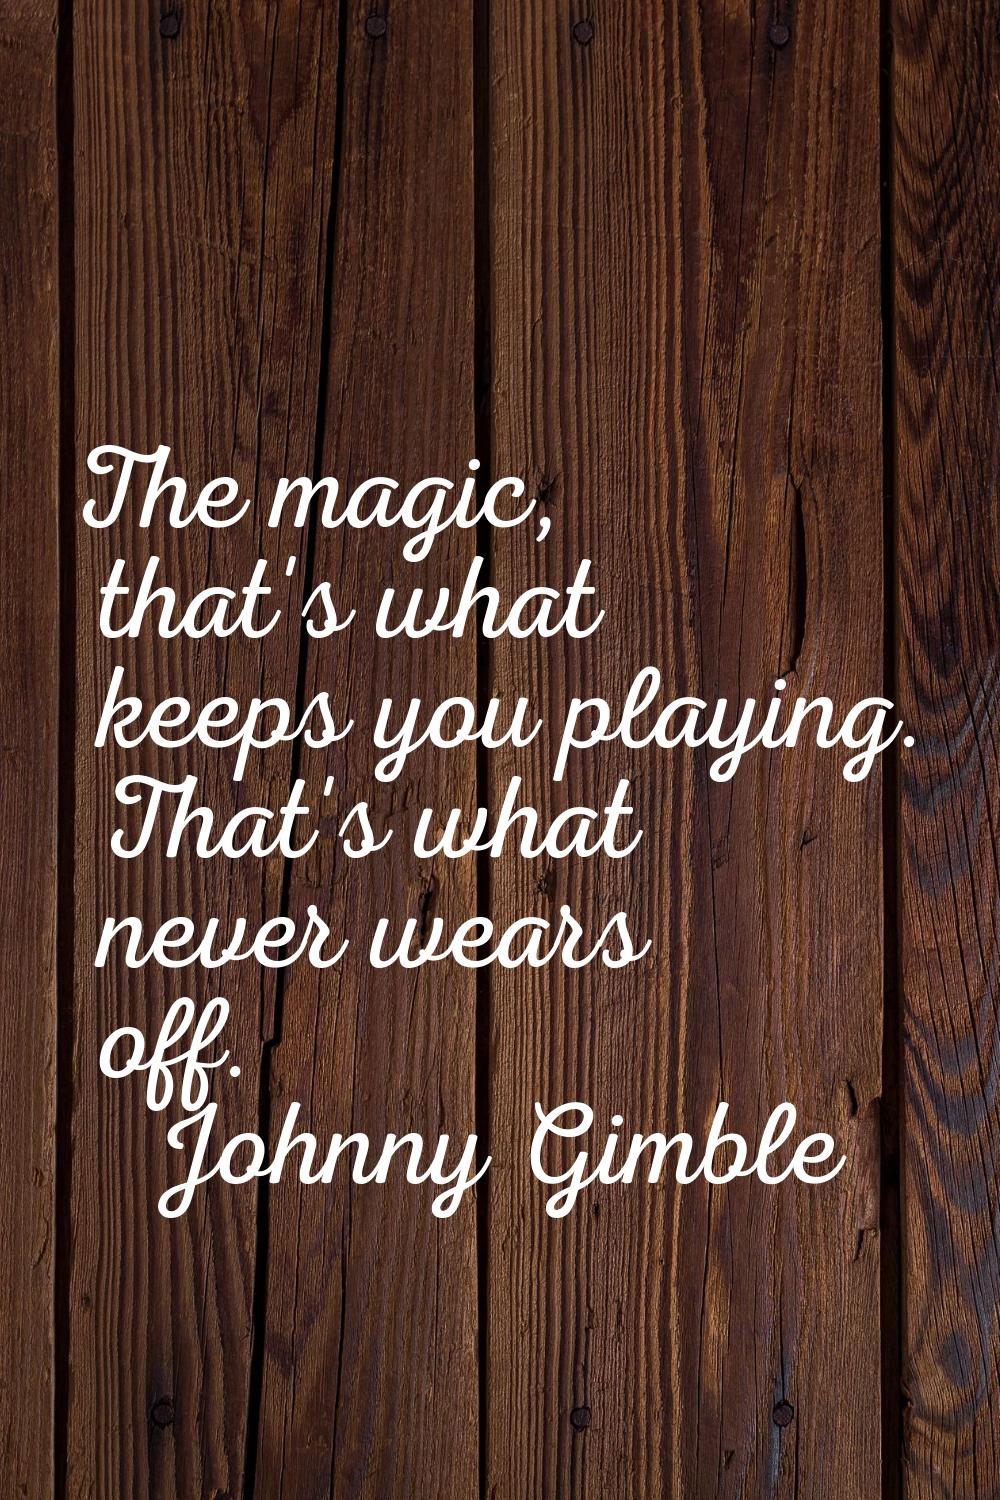 The magic, that's what keeps you playing. That's what never wears off.